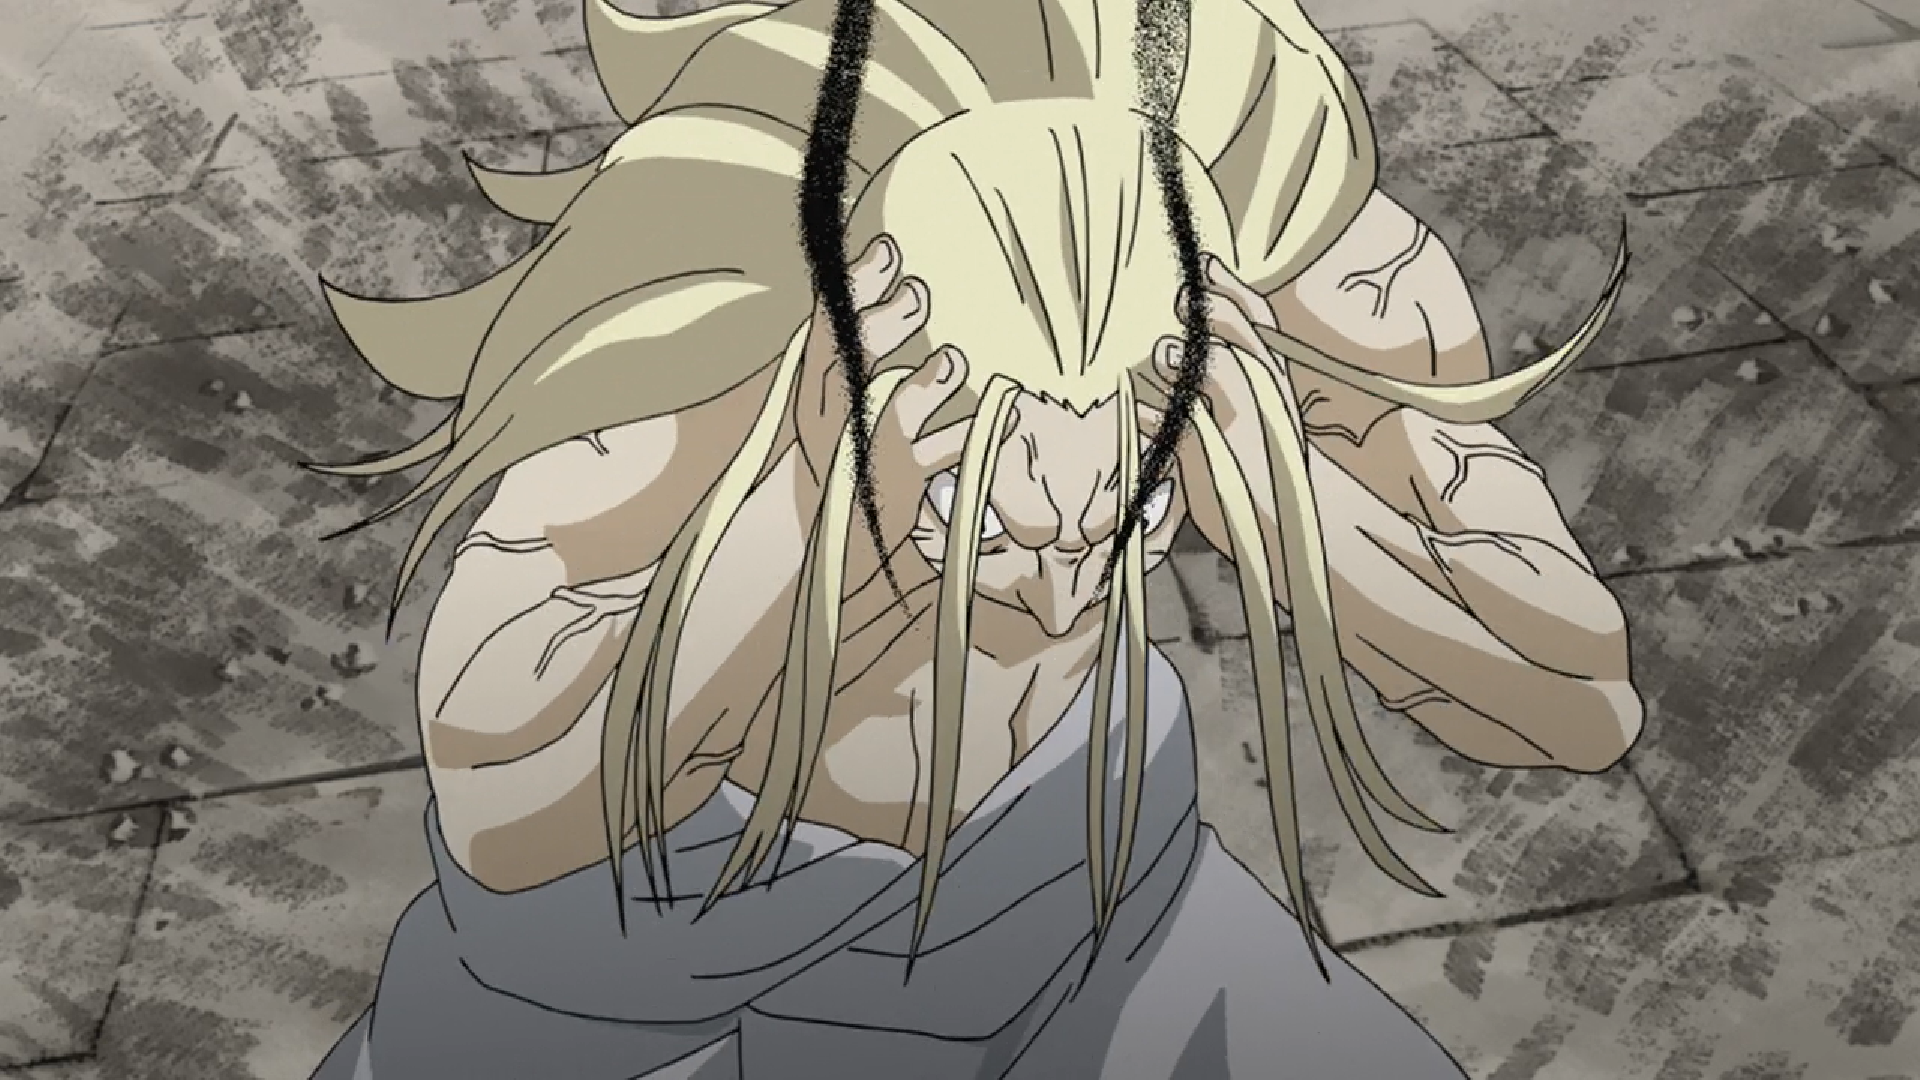 Why does Father in Fullmetal Alchemist: Brotherhood need to make